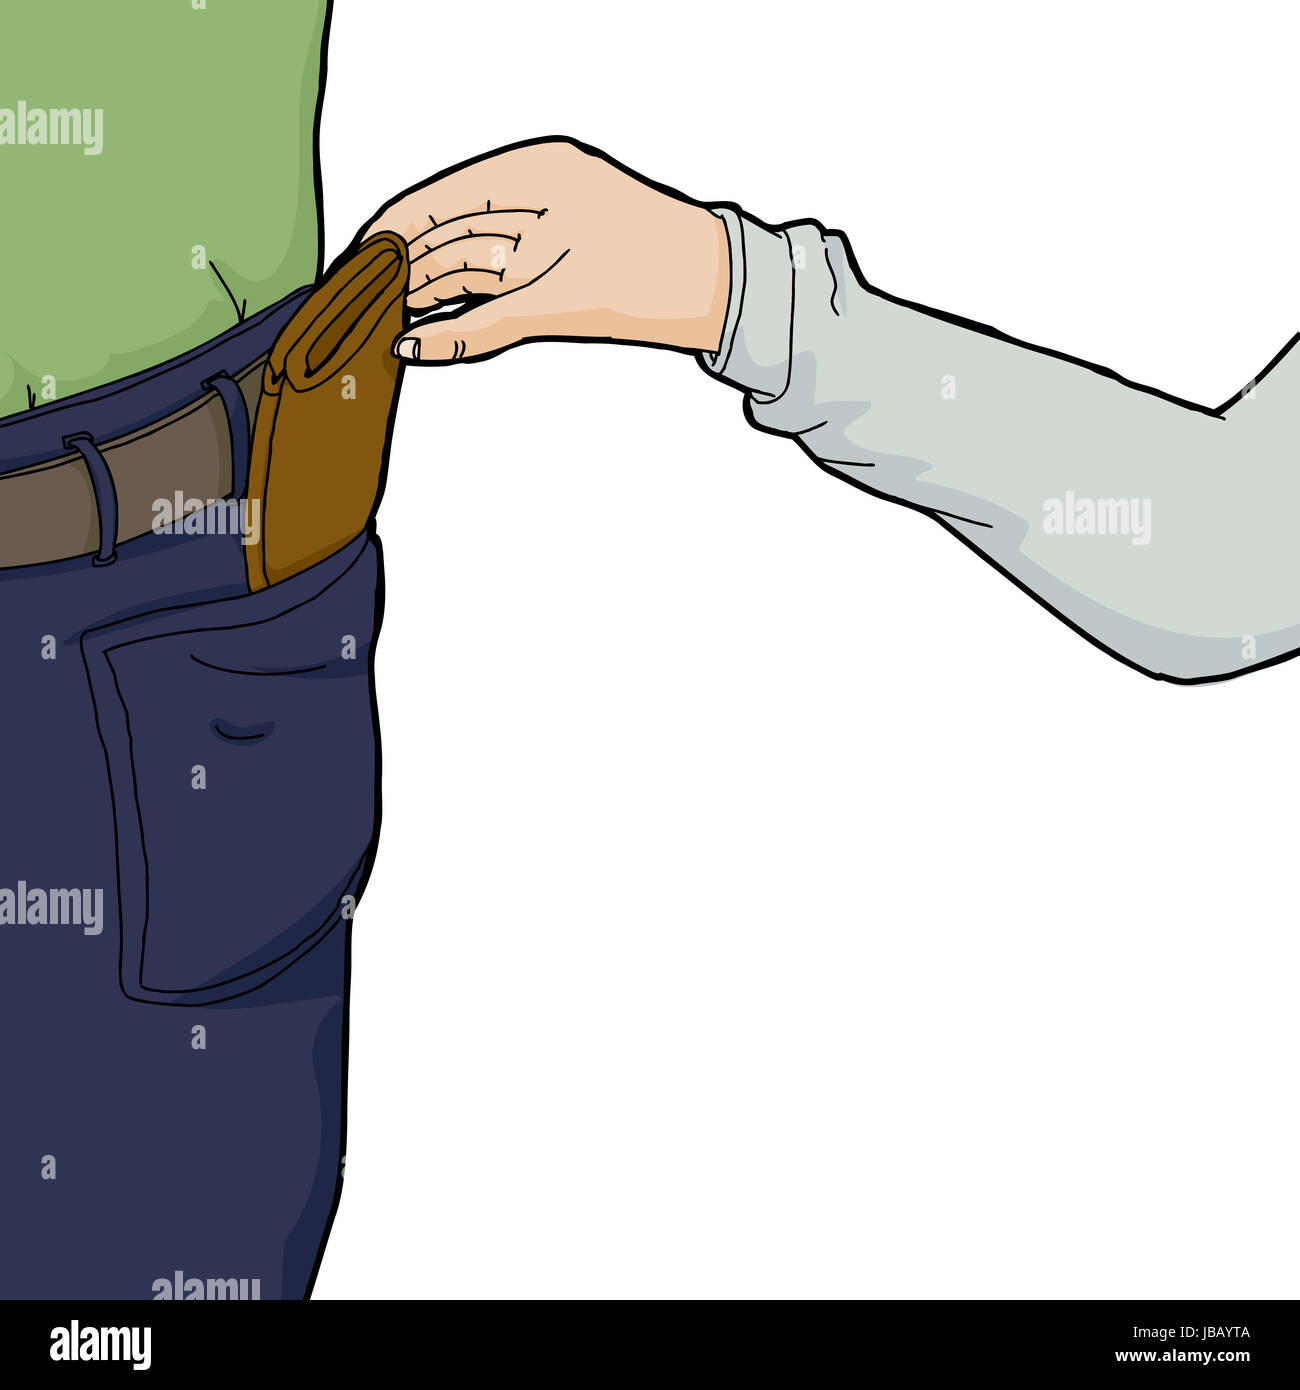 Hand of pickpocket stealing wallet from person Stock Photo - Alamy